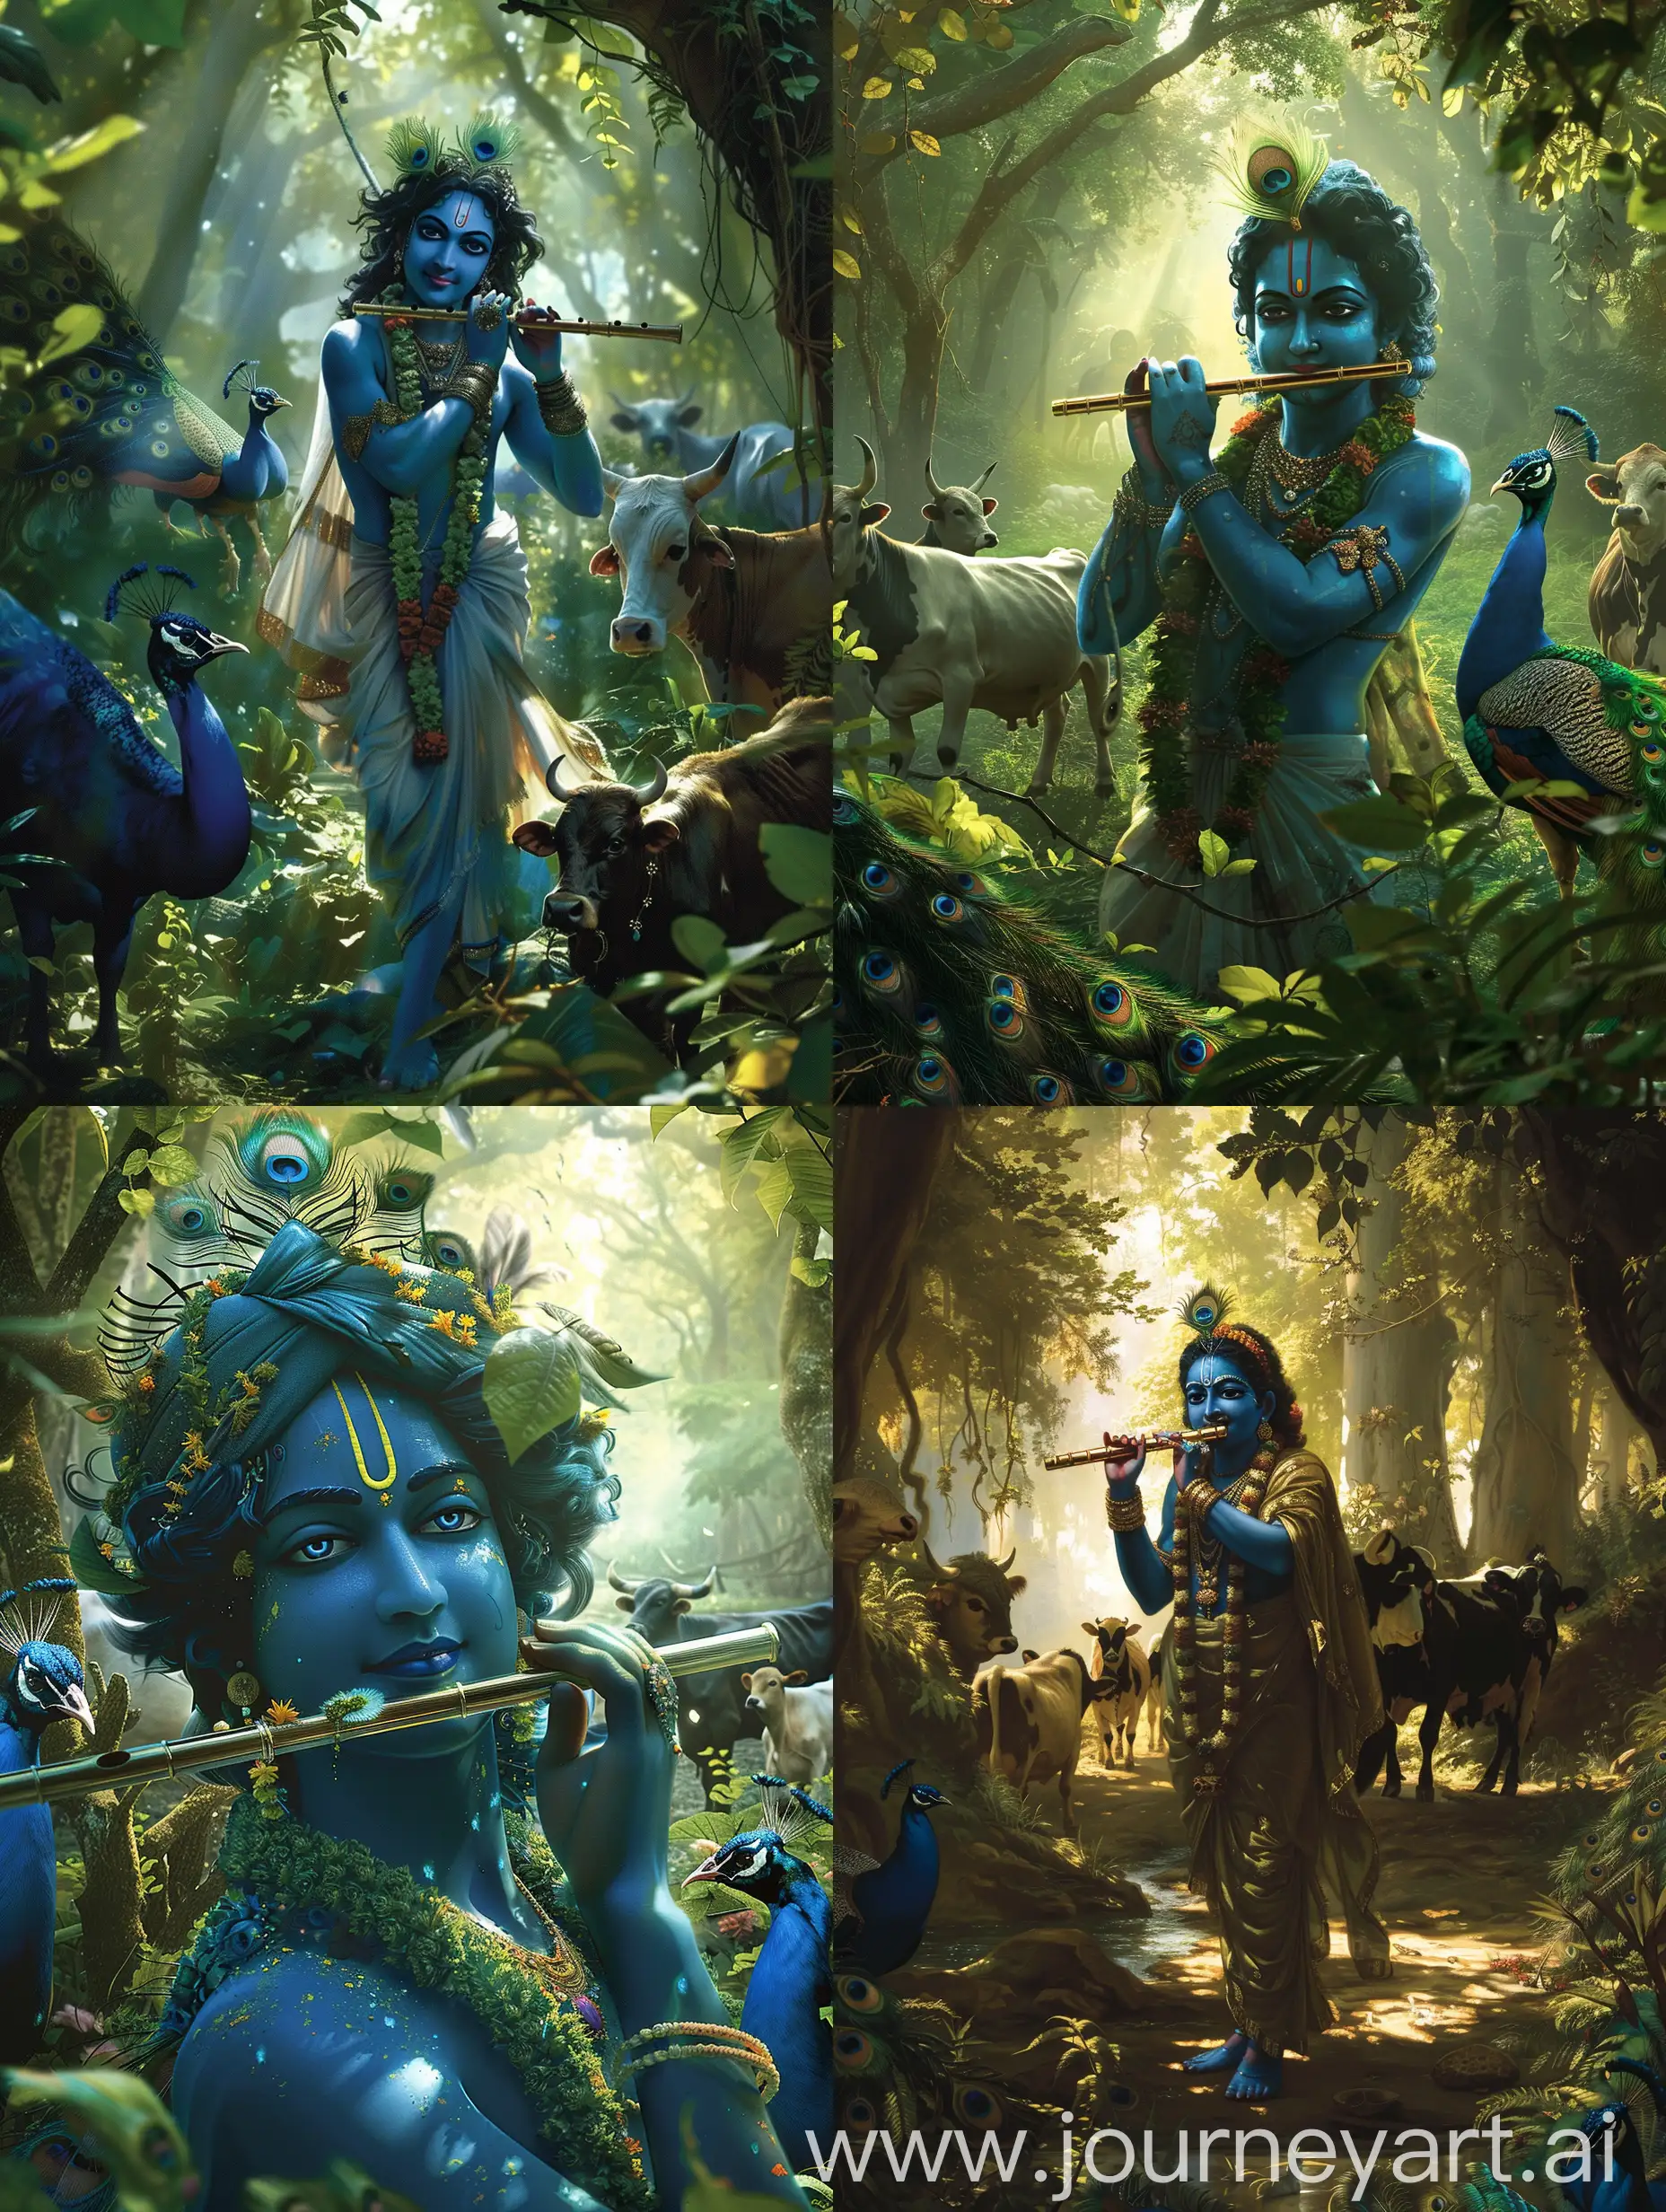 Shree Krishna, the blue-skinned deity, stands in a lush forest clearing, surrounded by peacocks and cows. His flute rests against his lips, and his eyes twinkle with divine mischief. Sunlight filters through the canopy, casting dappled shadows on his serene face.